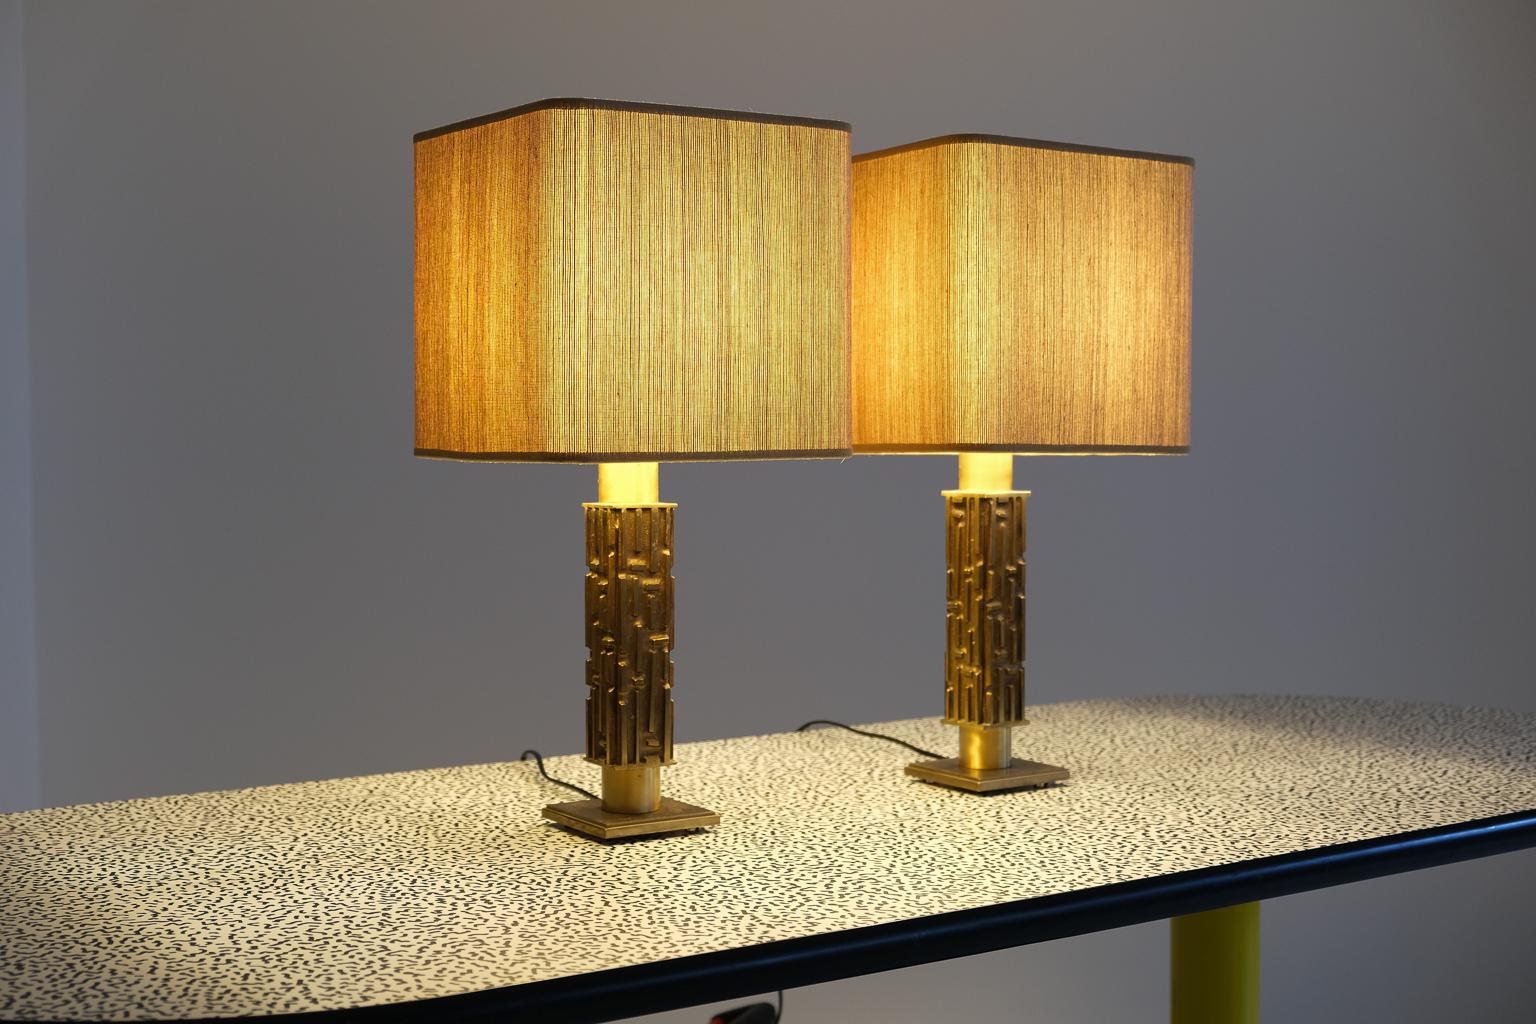 a pair of table lamps by angelo brotto. the lamp base is made of solid brass with a sculptural structure. the square lampshades are newly made and covered with seagrass paper. the electrics have been renewed.